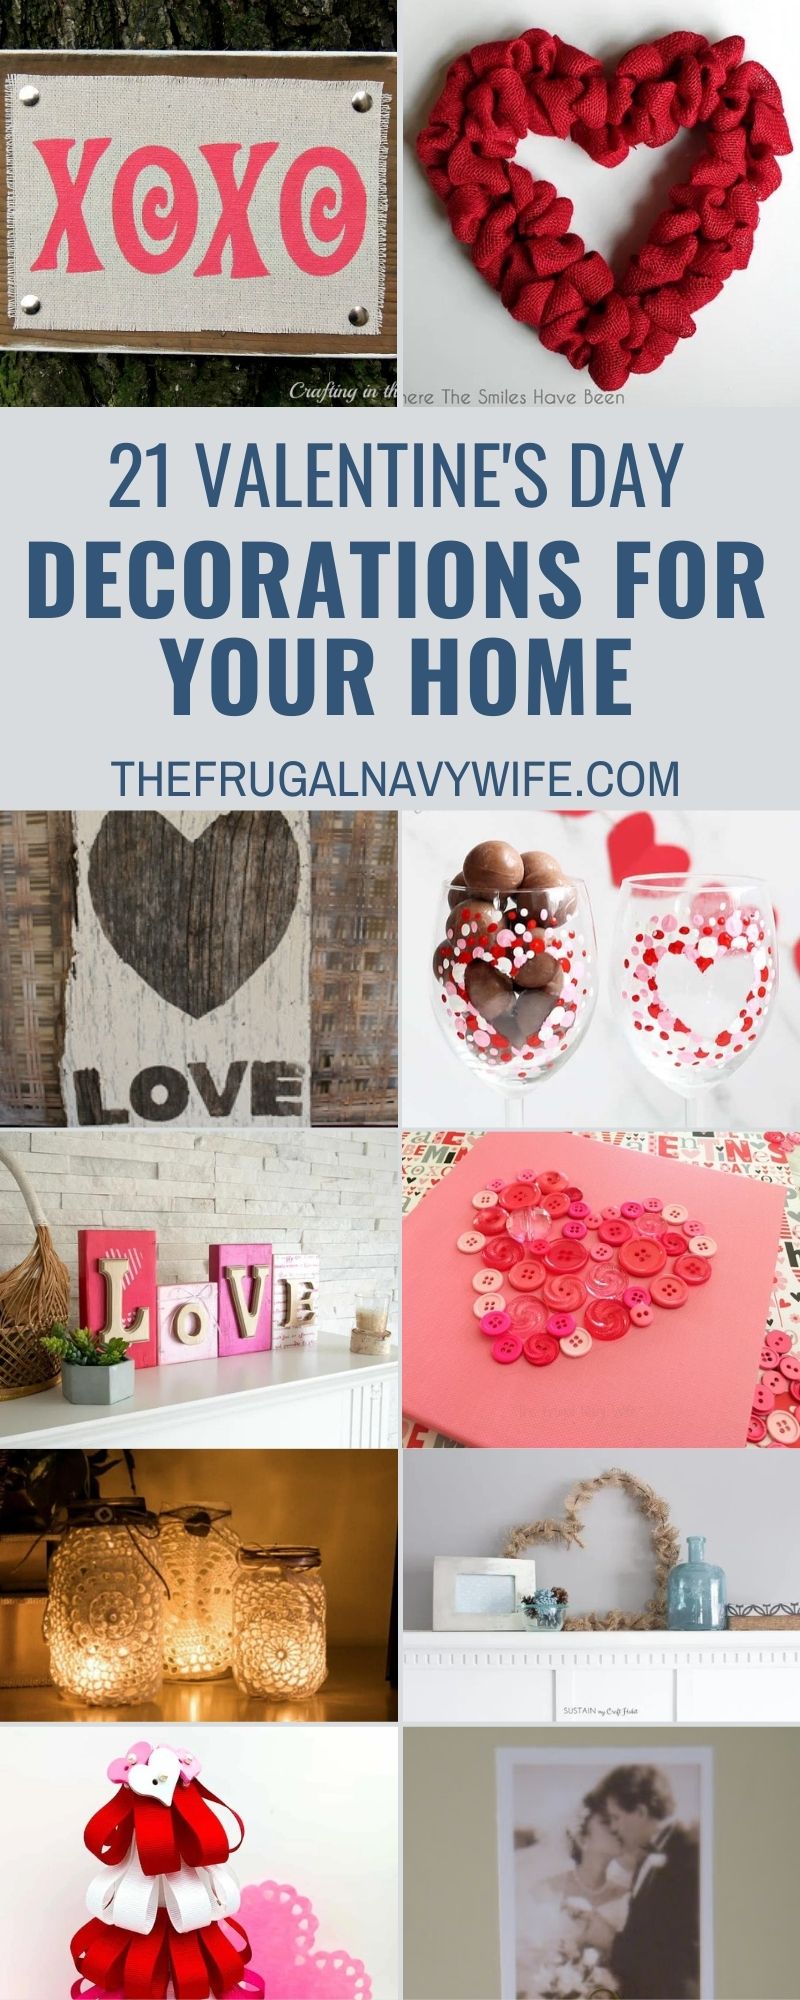 Valentine\'s Day Decorations for your home | The Frugal Navy Wife